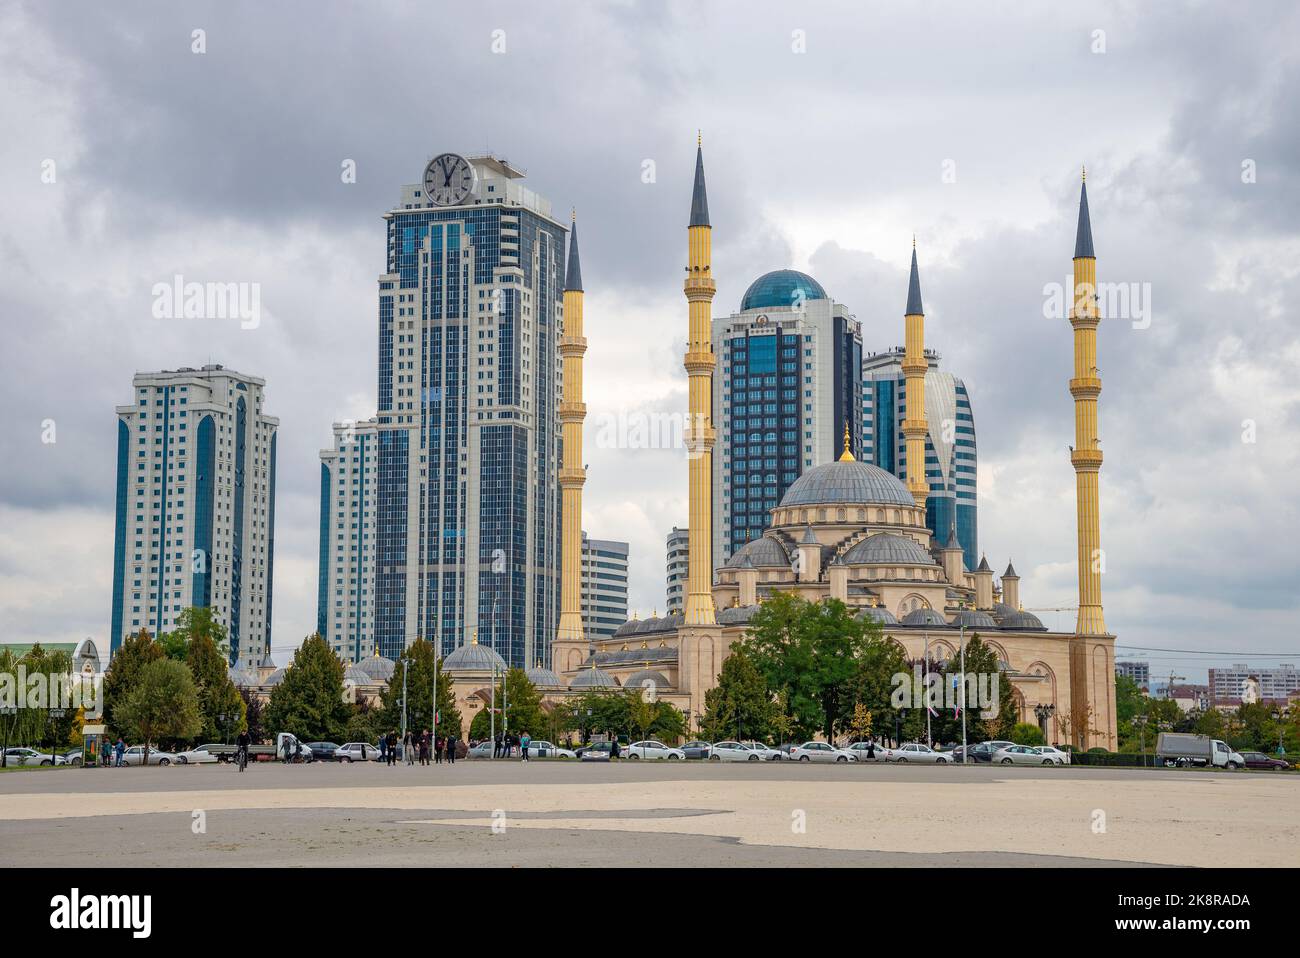 GROZNY, RUSSIA - SEPTEMBER 29, 2021: The Heart of Chechnya Mosque and the Grozny City complex, Chechen Republic. Russia Stock Photo